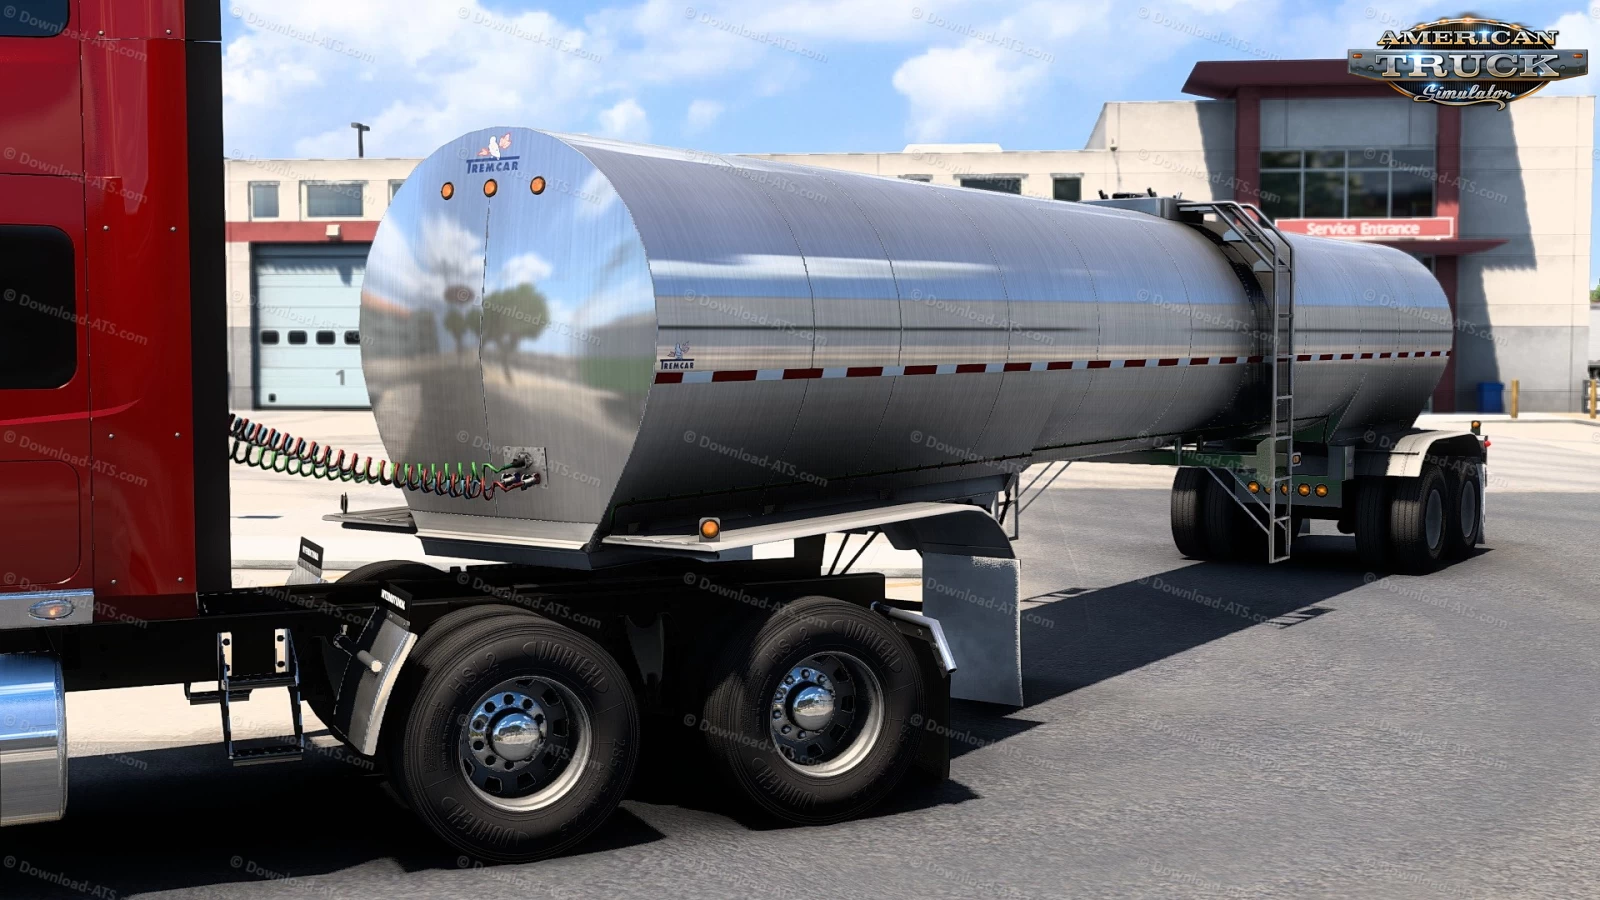 Trailer Tremcar 3A Sanitary v1.4.2 by Smarty (1.44x) for ATS